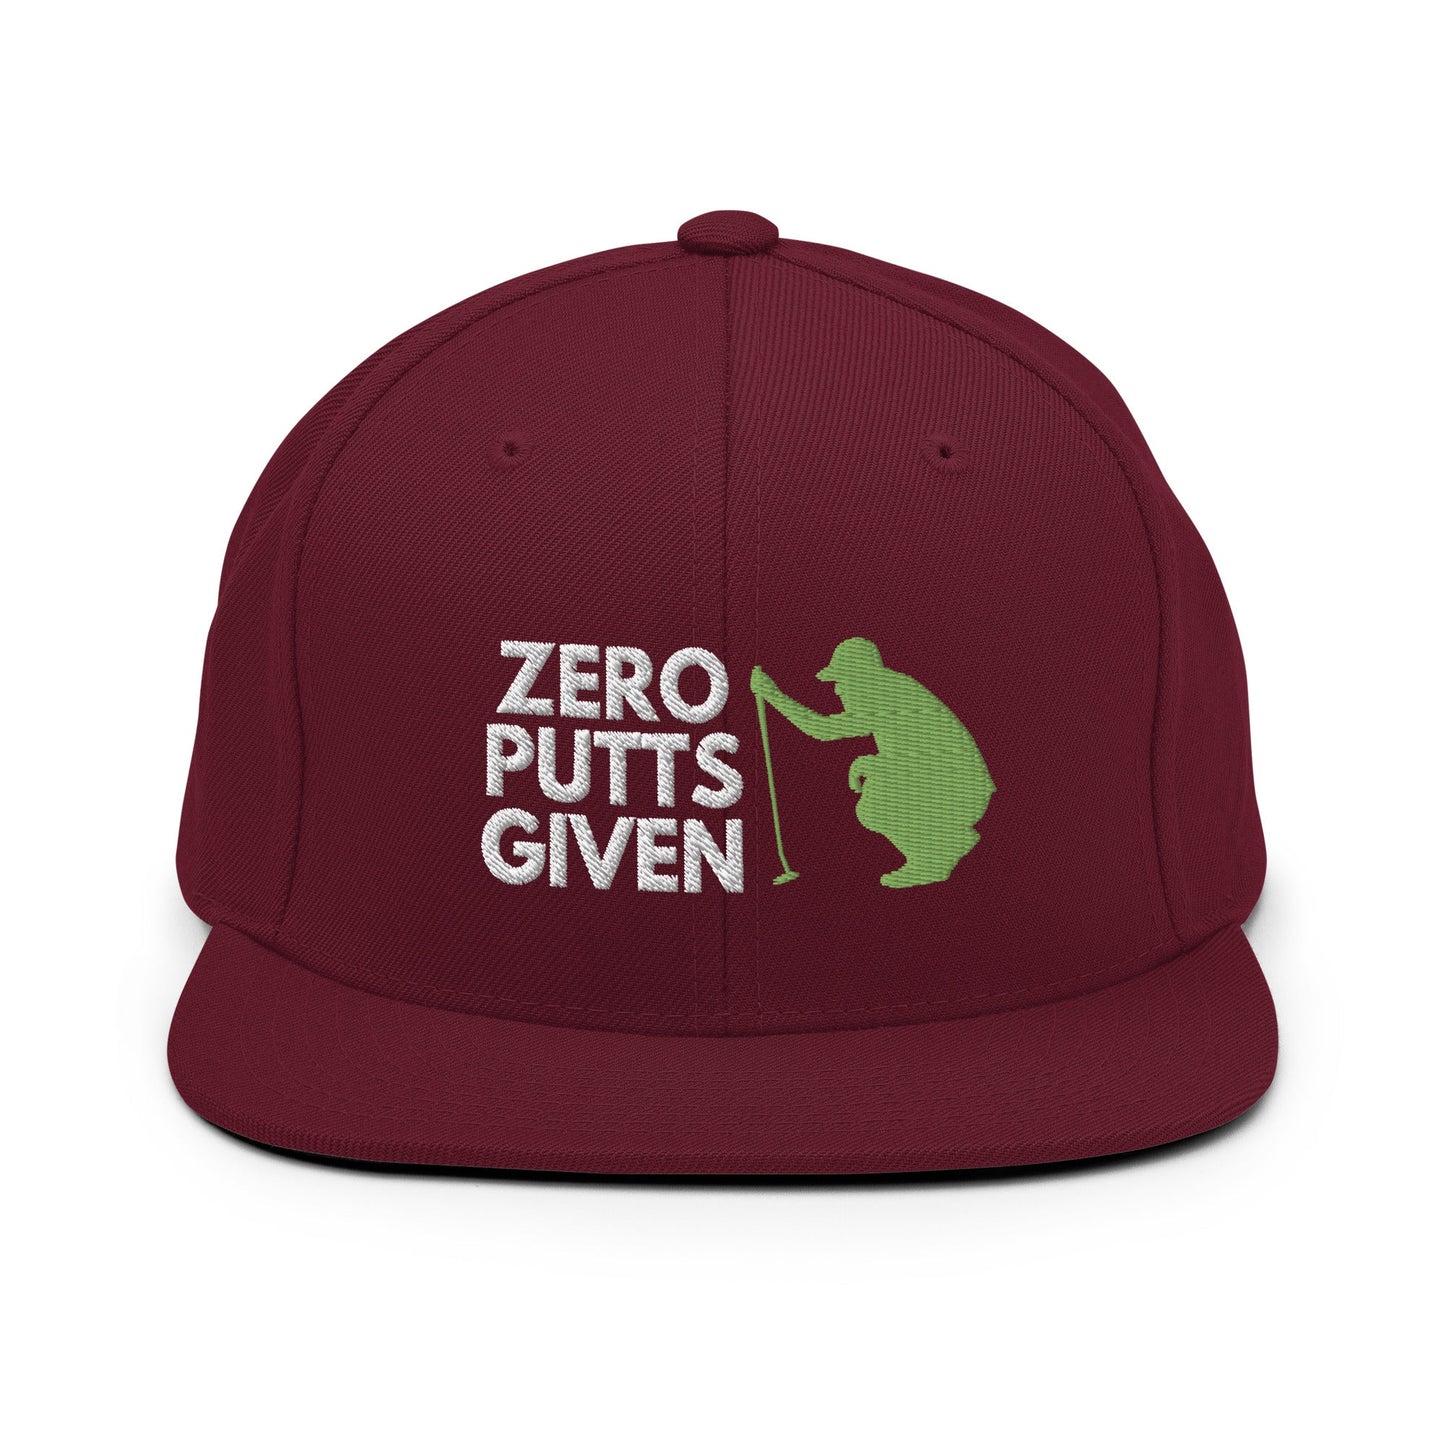 Funny Golfer Gifts  Snapback Hat Maroon Zero Putts Given Hat Snapback Hat